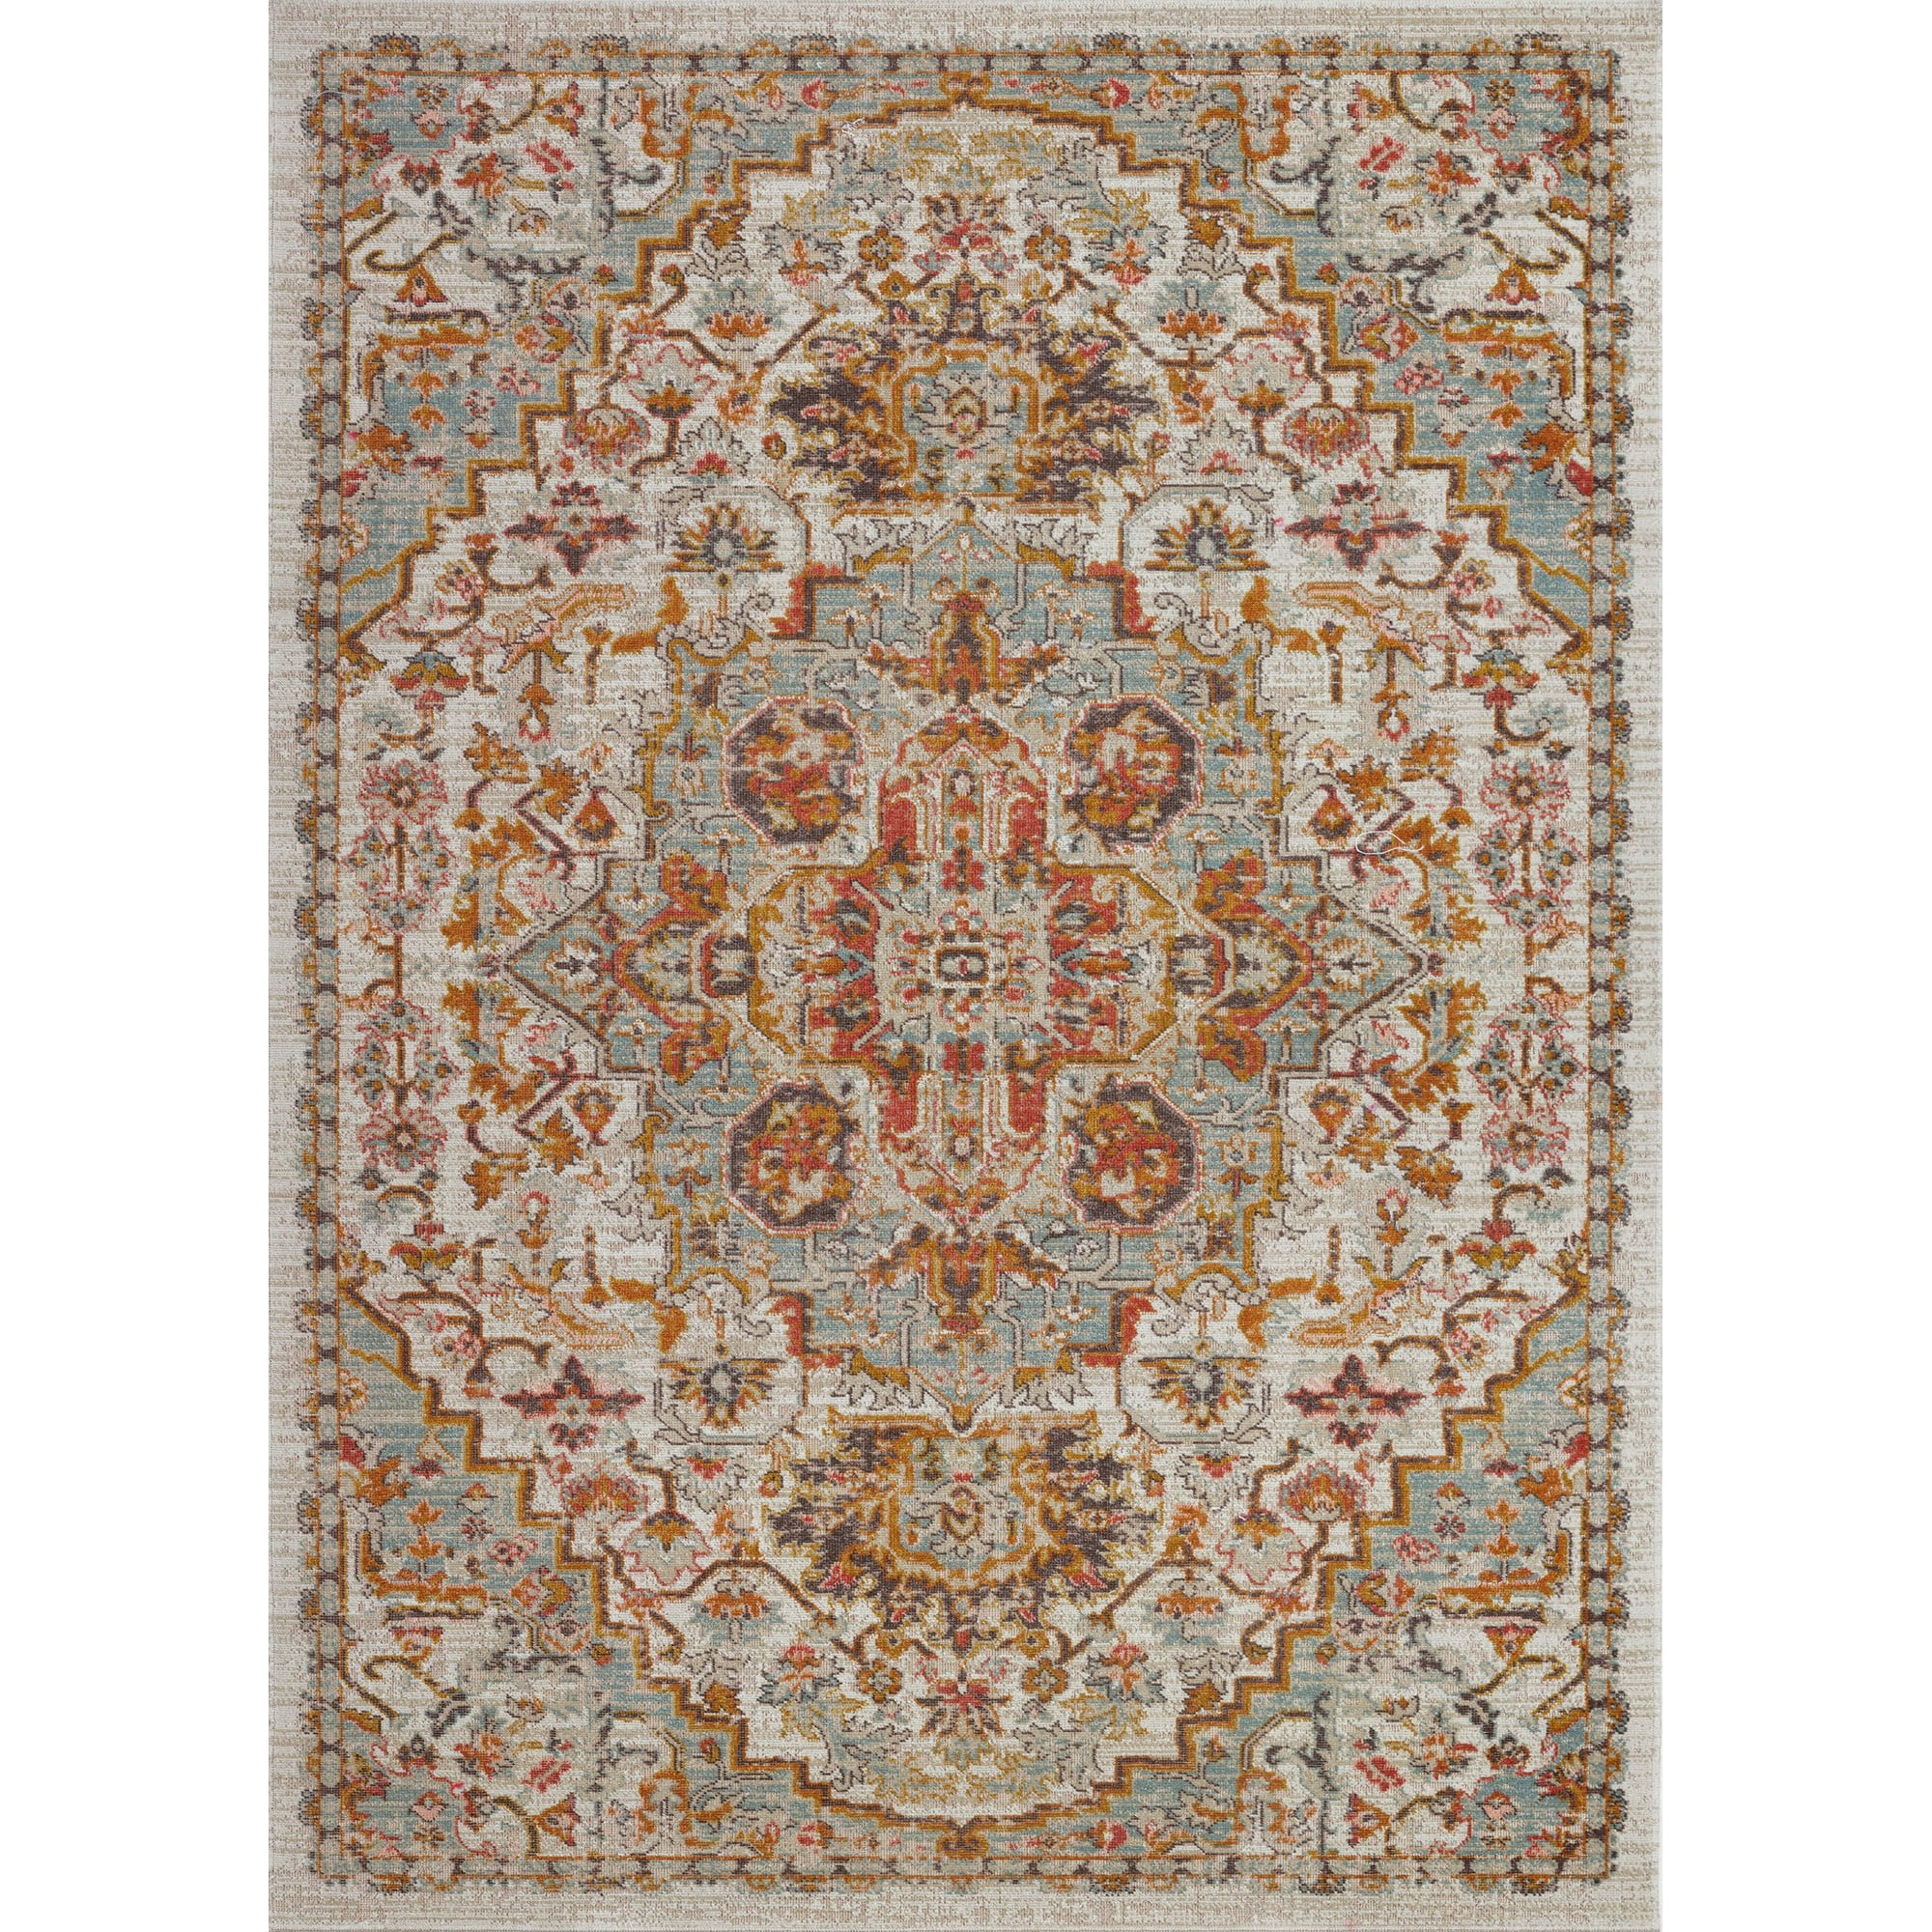 Ladole Rugs Vintage Traditional Persian, Orange And Brown Rugs